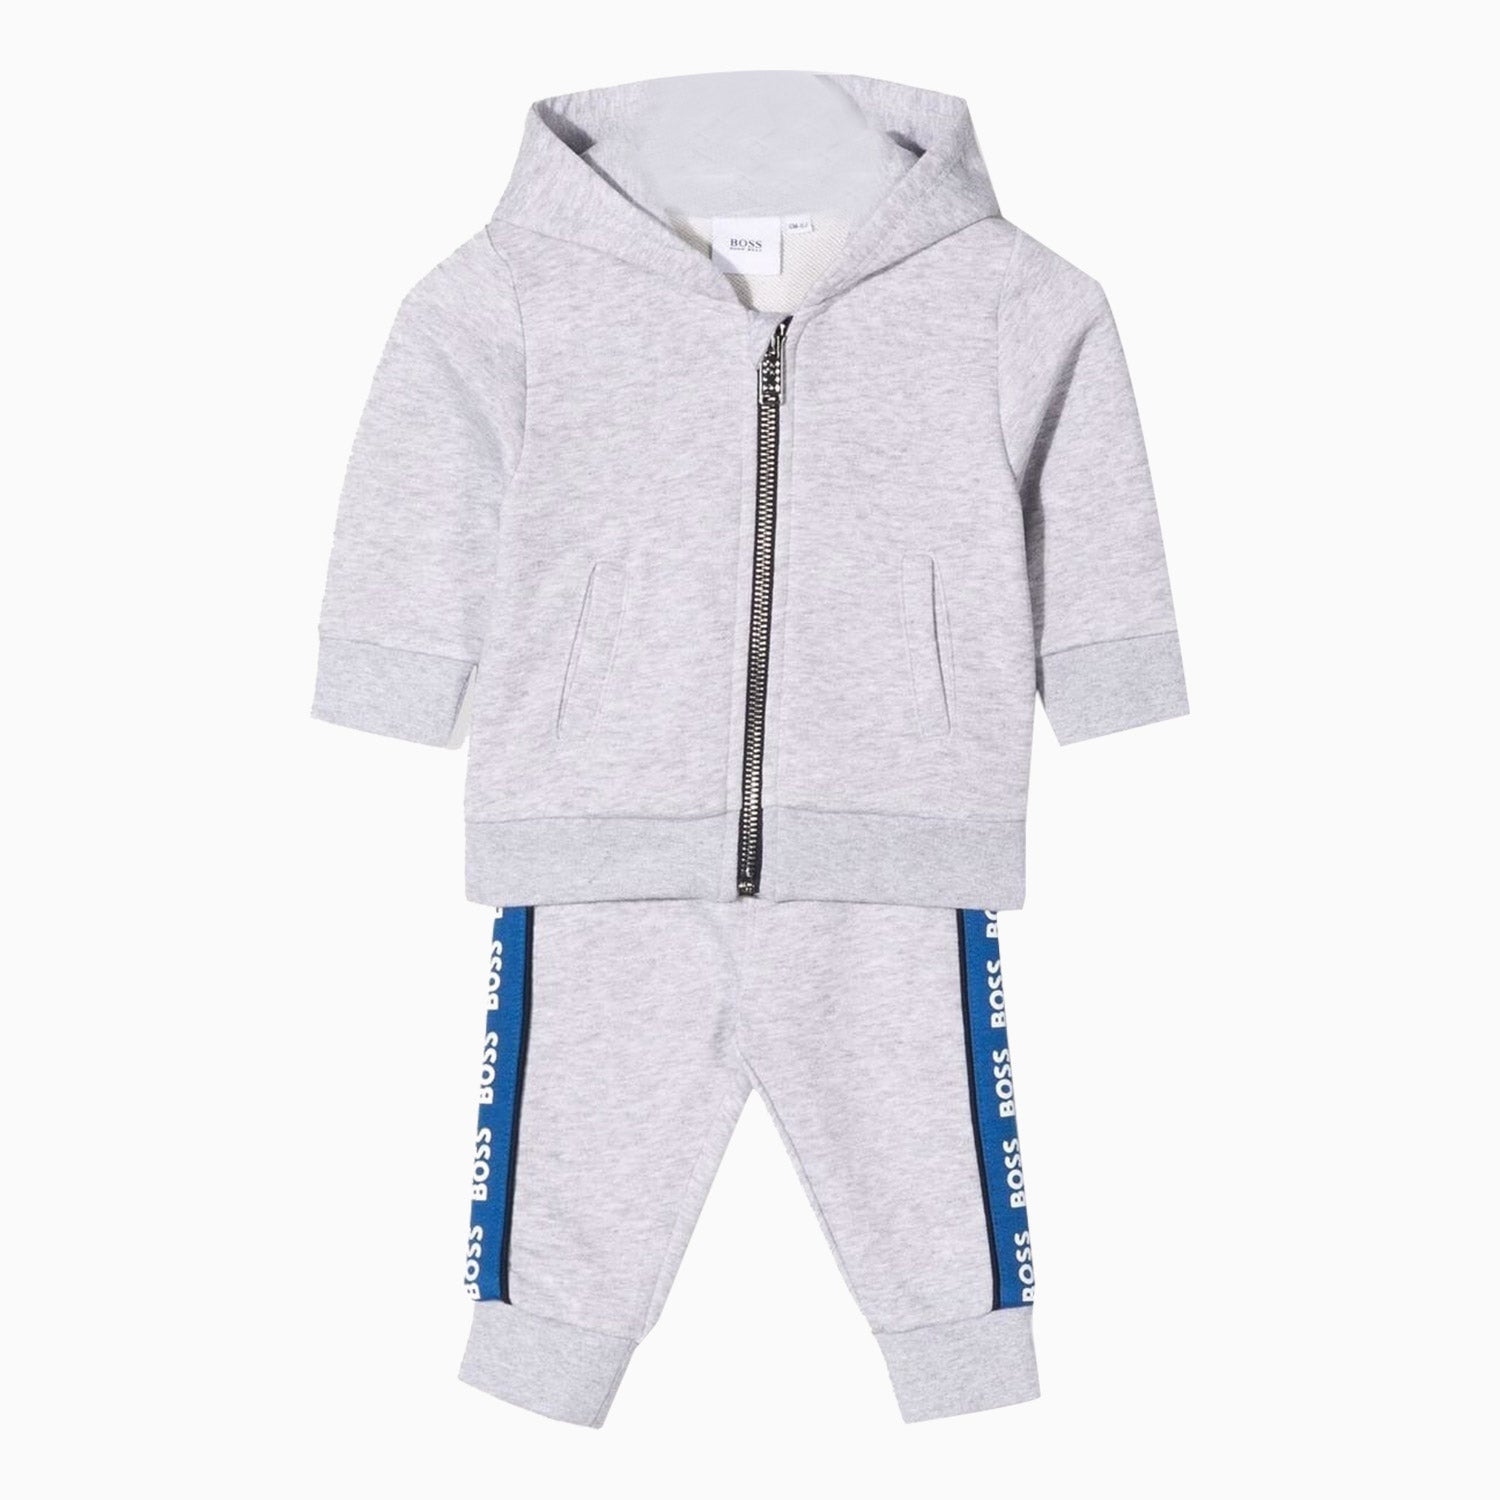 hugo-boss-kids-french-terry-track-suit-j08063-a32